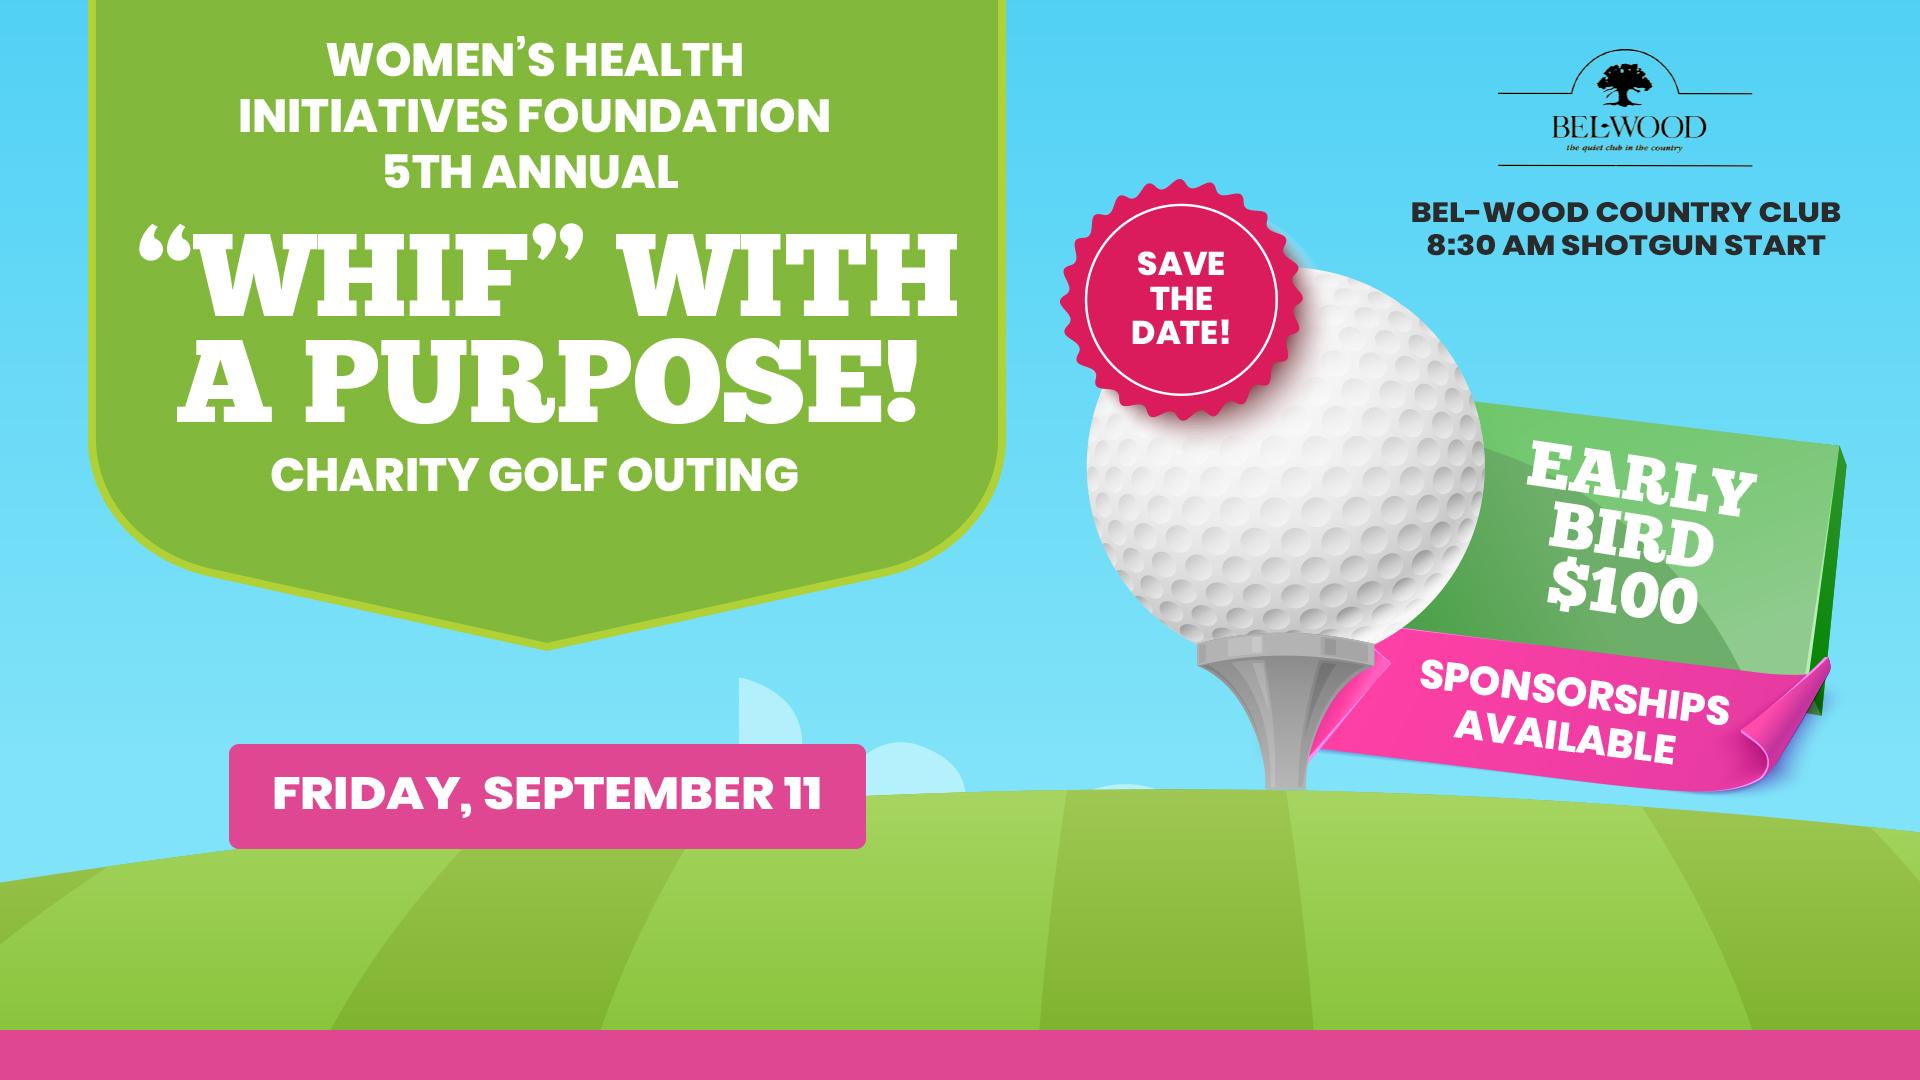 2020 "WHIF" with a Purpose! Charity Golf Outing